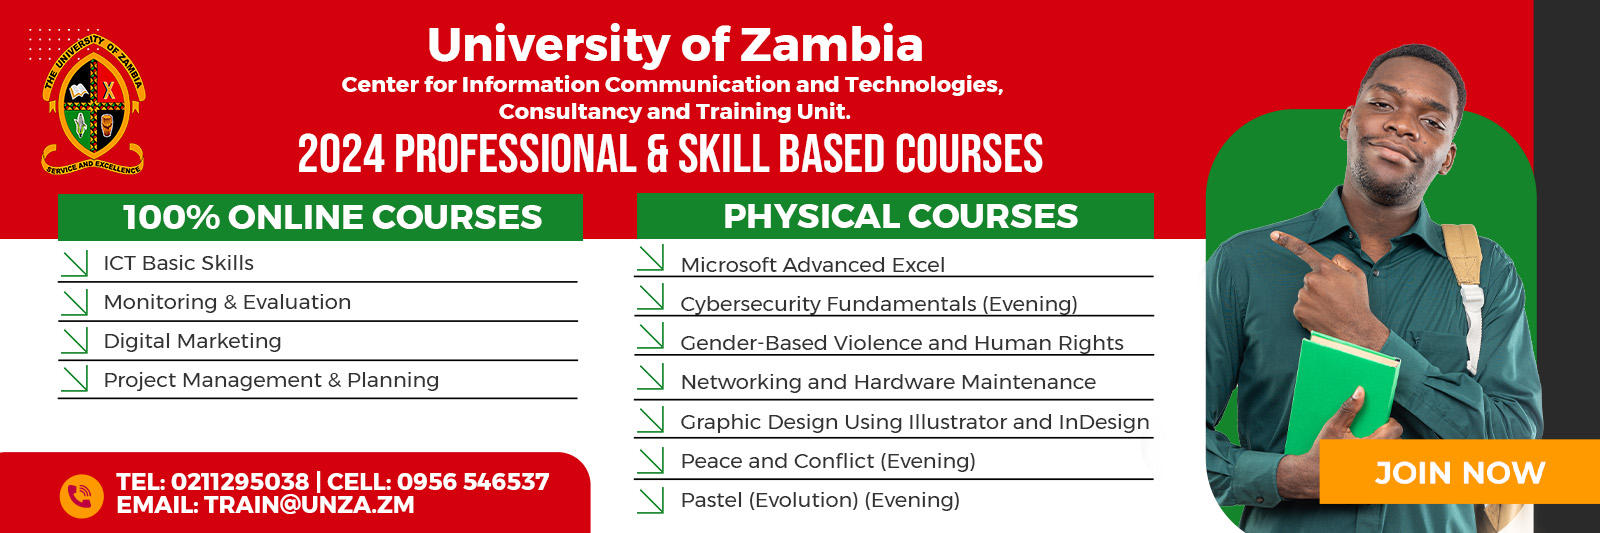 2024 Professional & Skill Based Courses